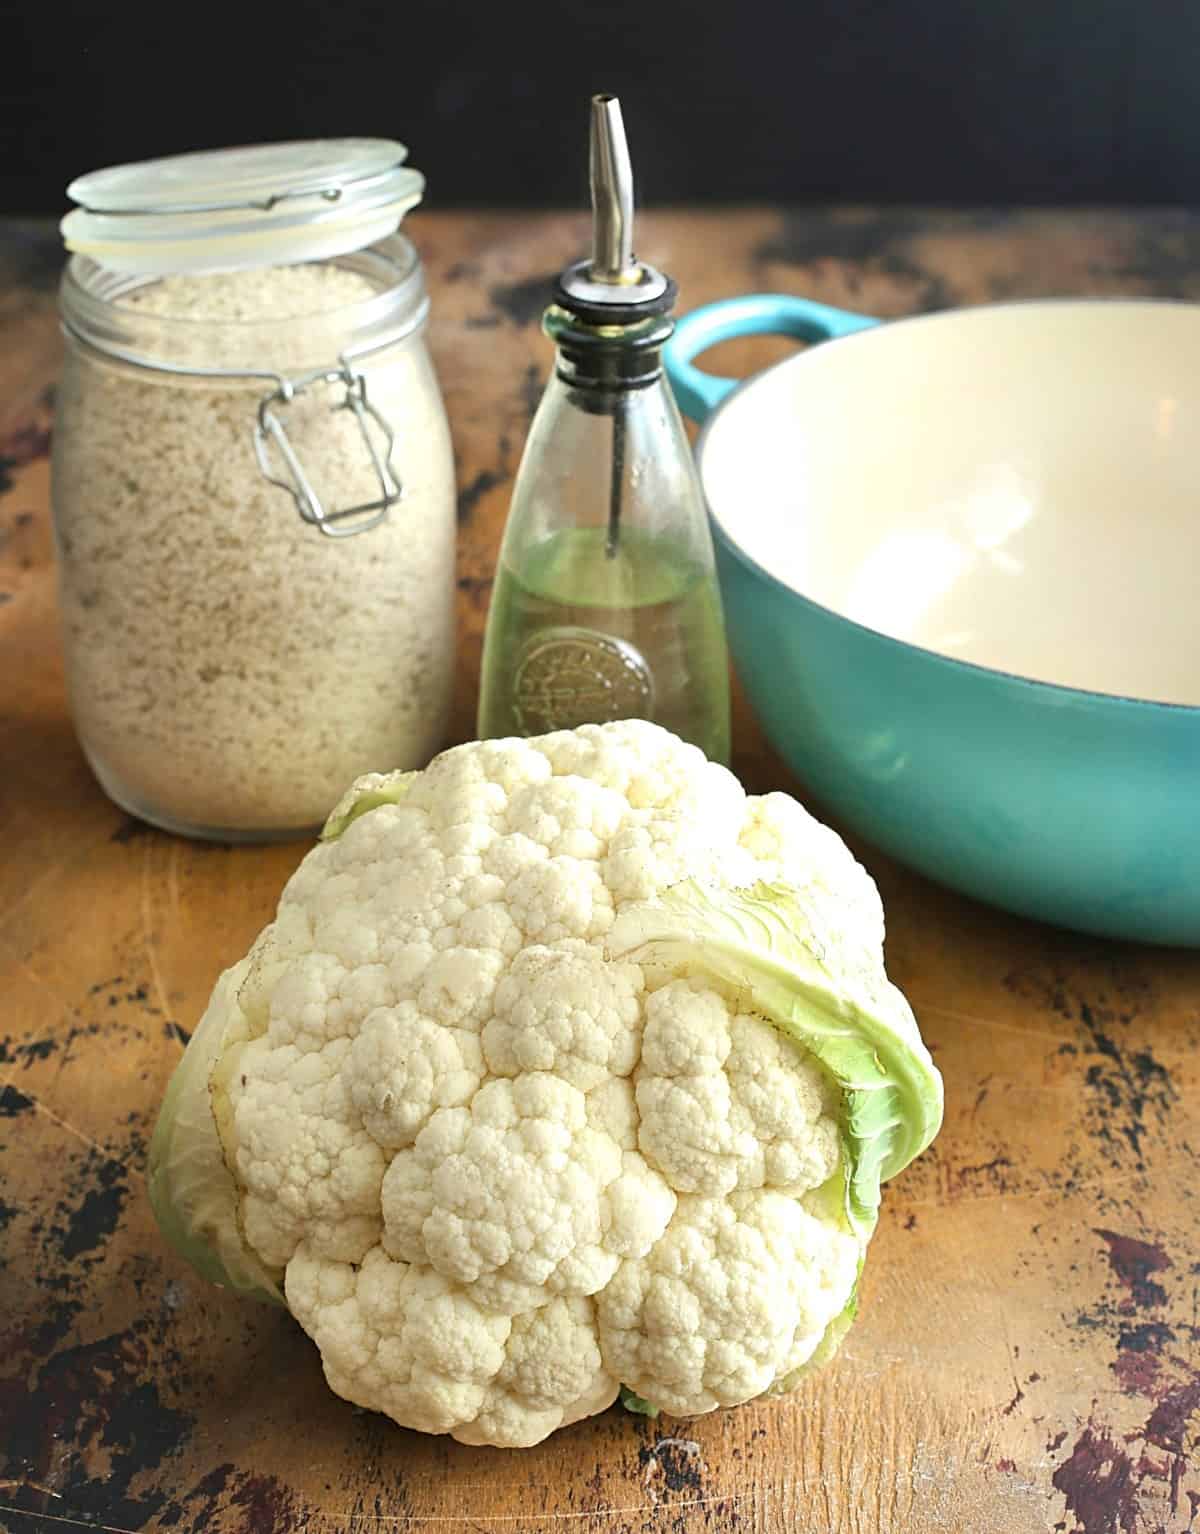 Cauliflower, oil in a bottle, bread crumbs in a jar and a blue skillet